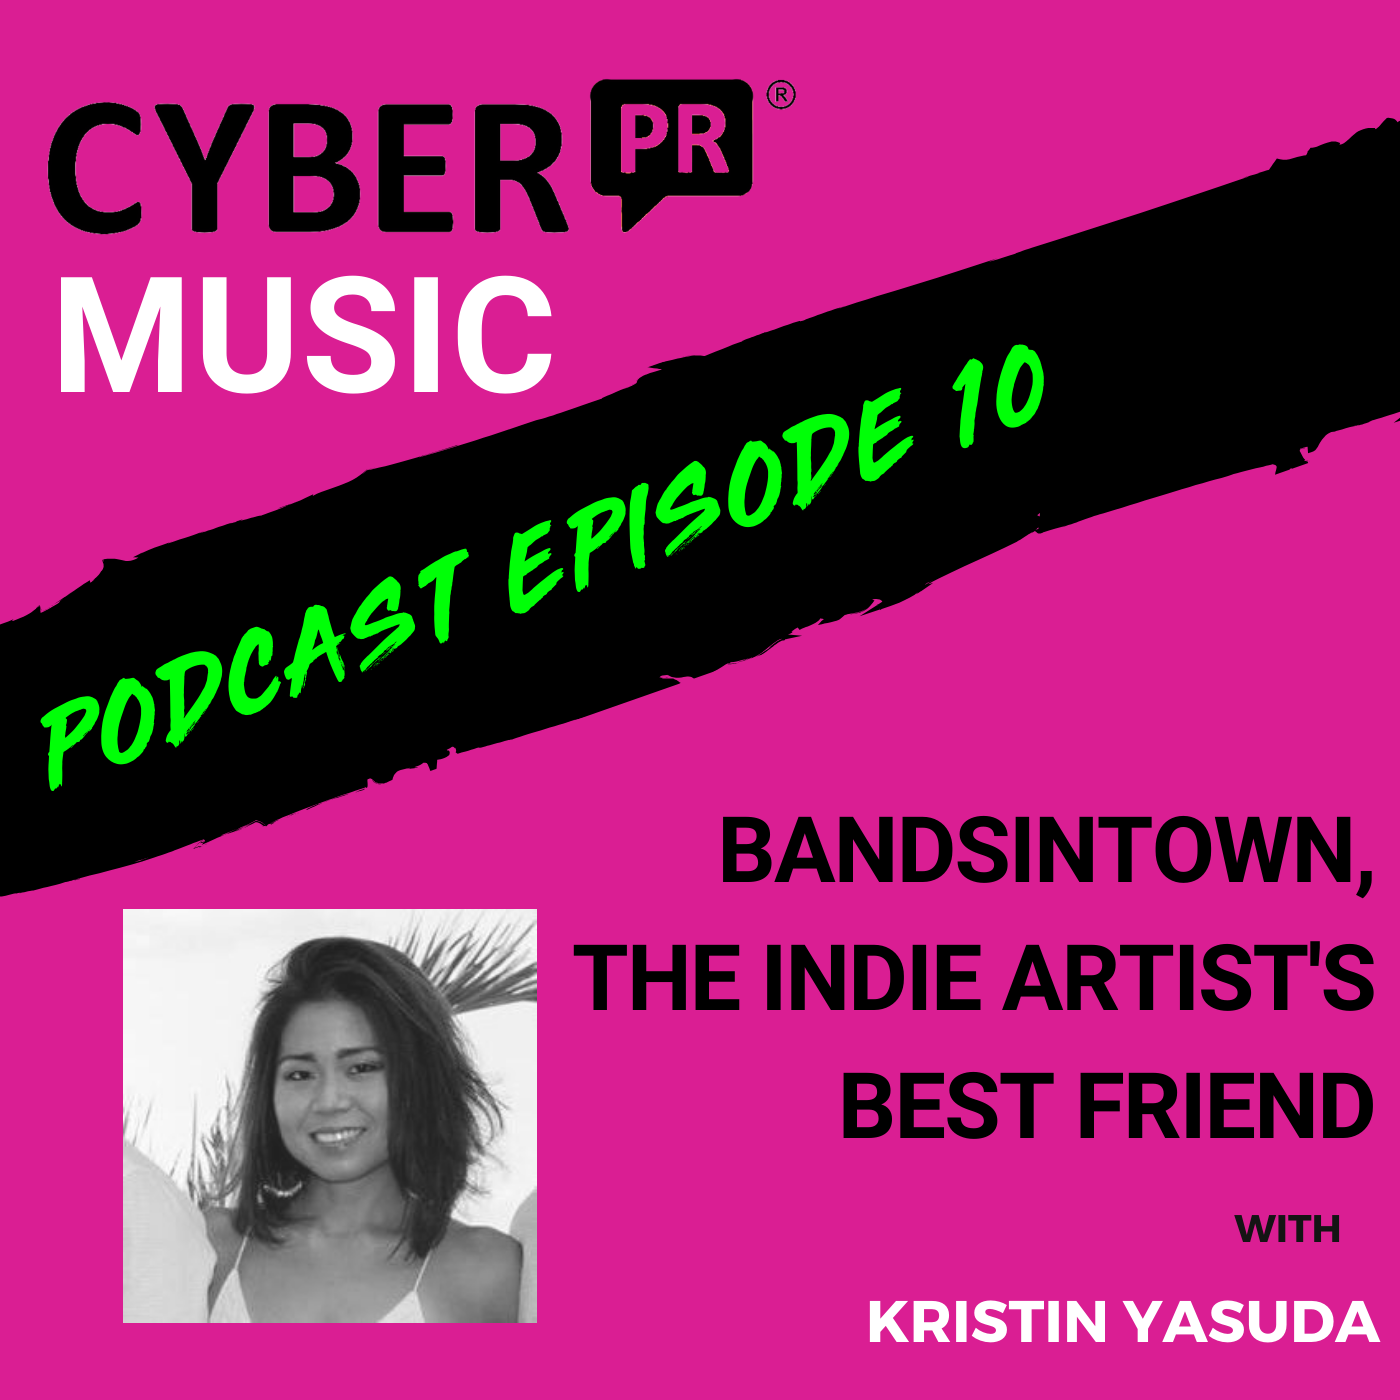 The Cyber PR Music Podcast EP 10: Bandsintown, The Indie Artist's Best Friend with Kristin Yasuda